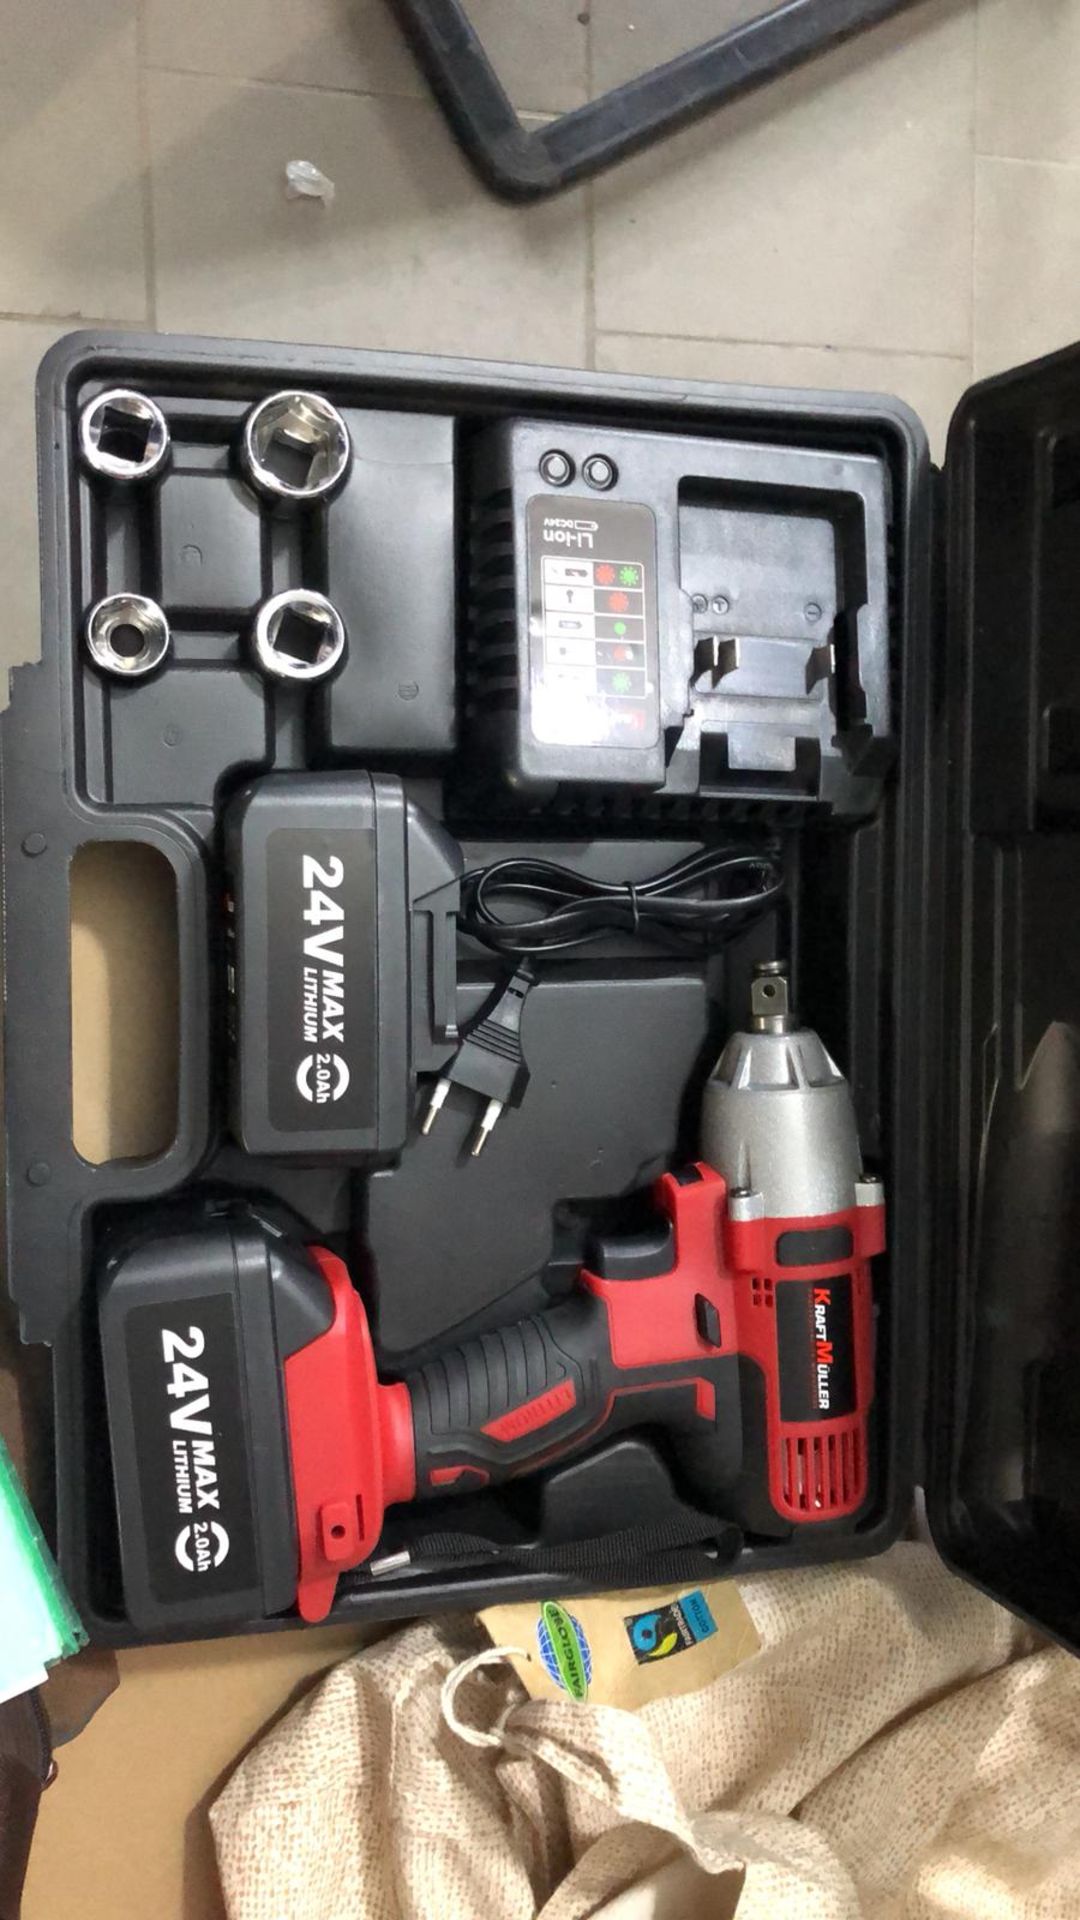 V Brand New 24V Cordless Impact Wrench - Two Lithium Ion Battries (1 Hour Quick Charge) - 2200